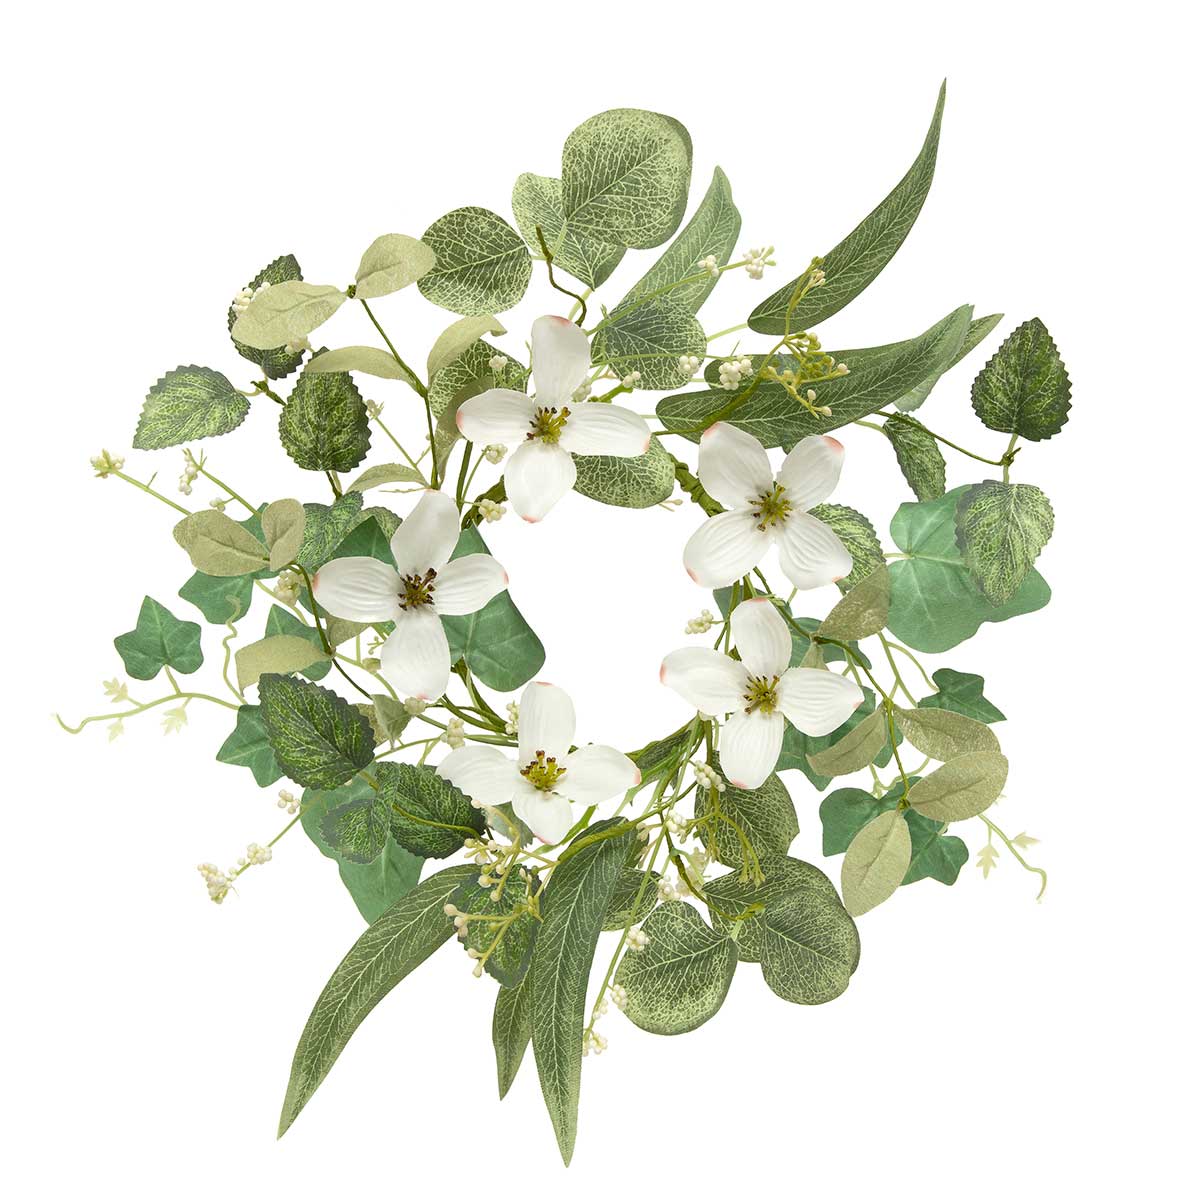 MINI WREATH DOGWOOD/BERRY 14IN (INNER RING 5IN) POLYESTER